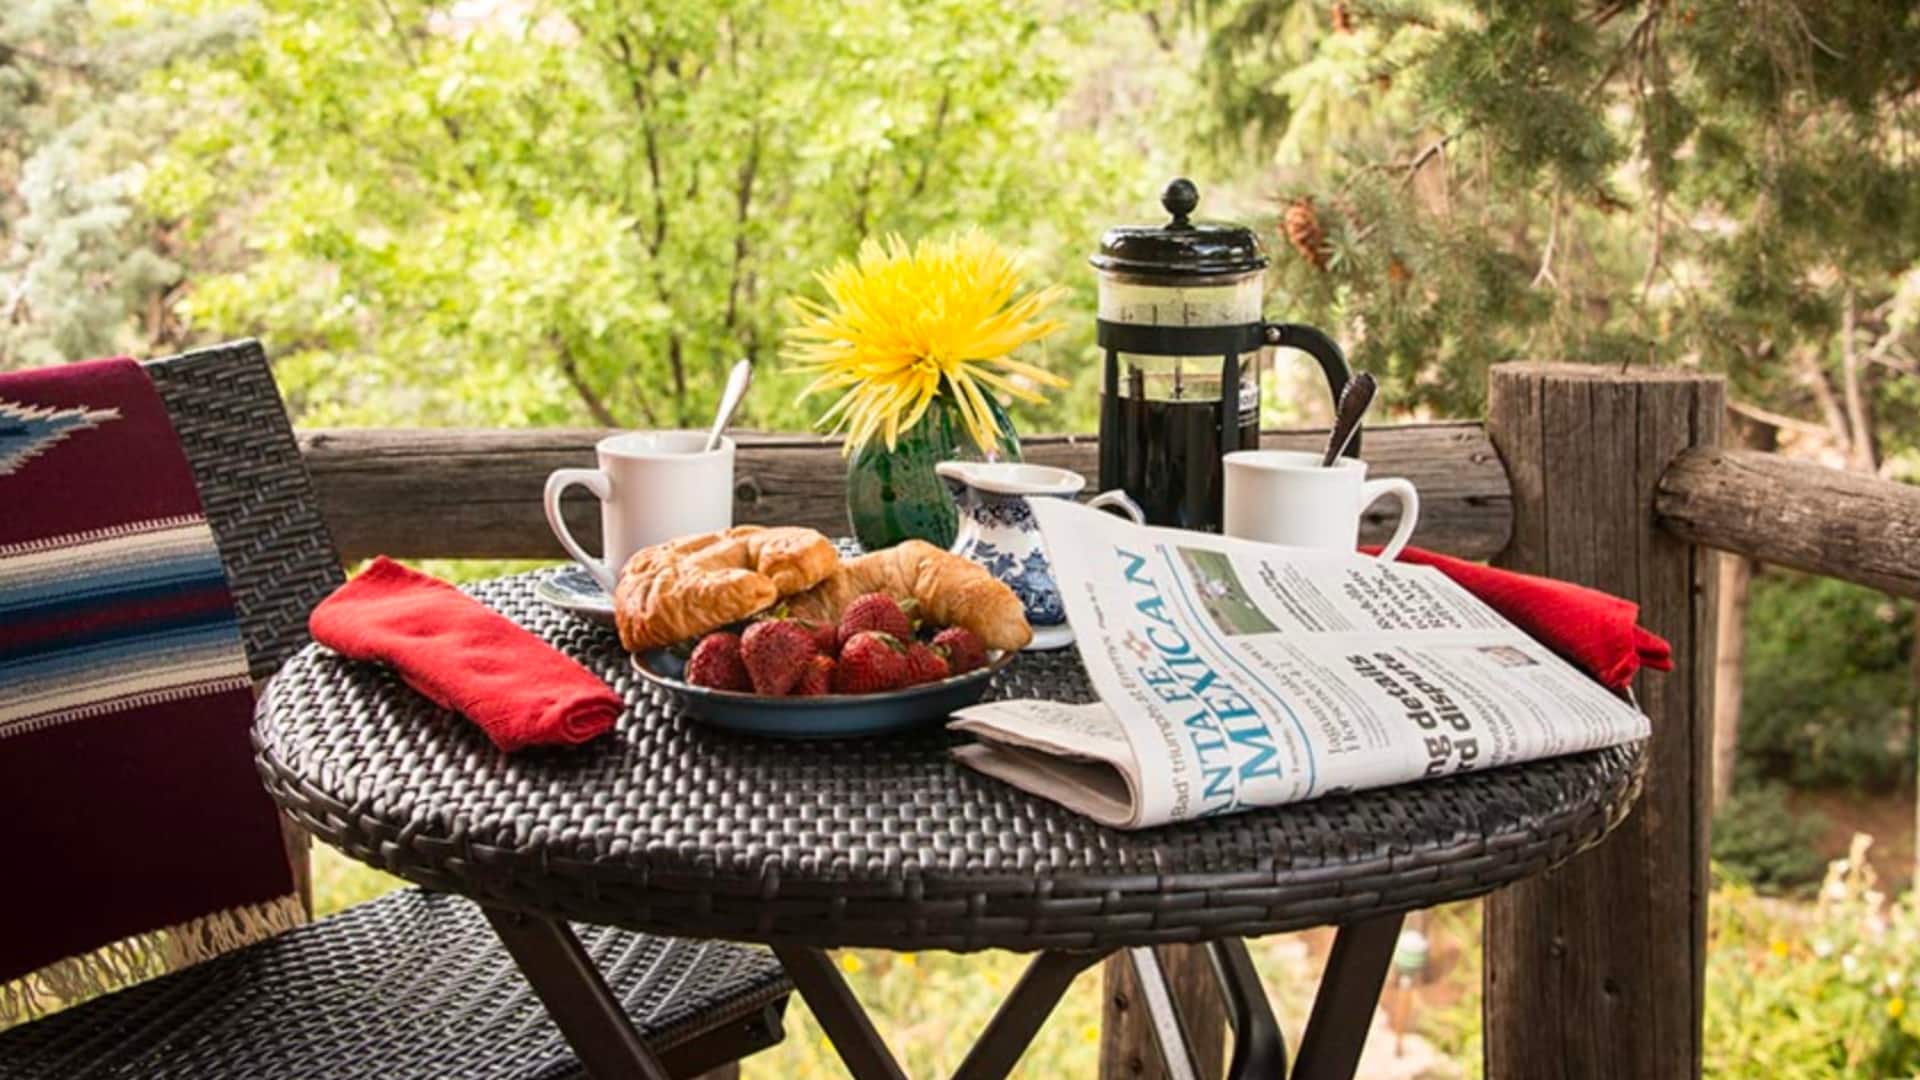 A patio table at Inn of the Turquoise Bear with coffee press, baked goods, strawberries, flower vase, and a newspaper